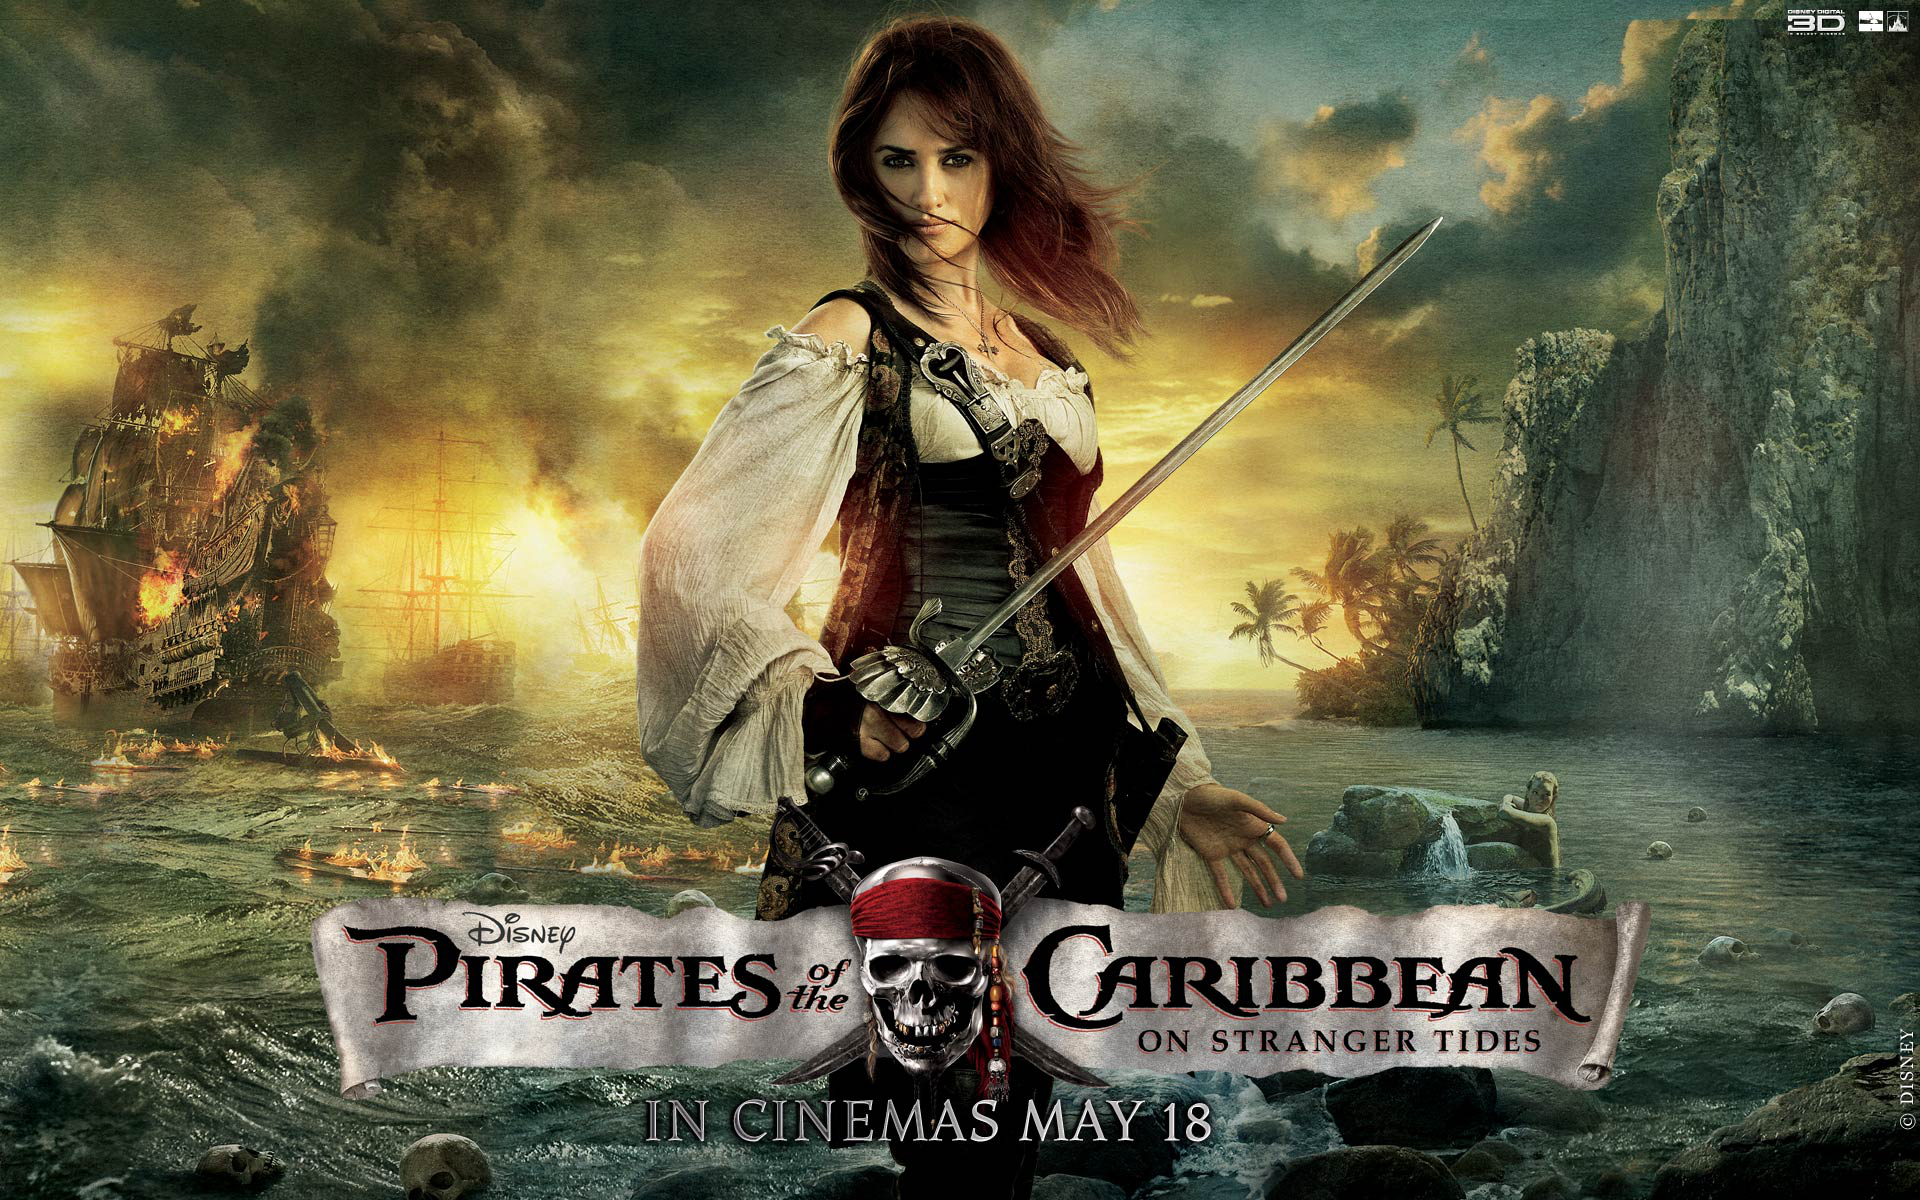 pirates of the caribbean, movie, pirates of the caribbean: on stranger tides, angelica teach, penelope cruz